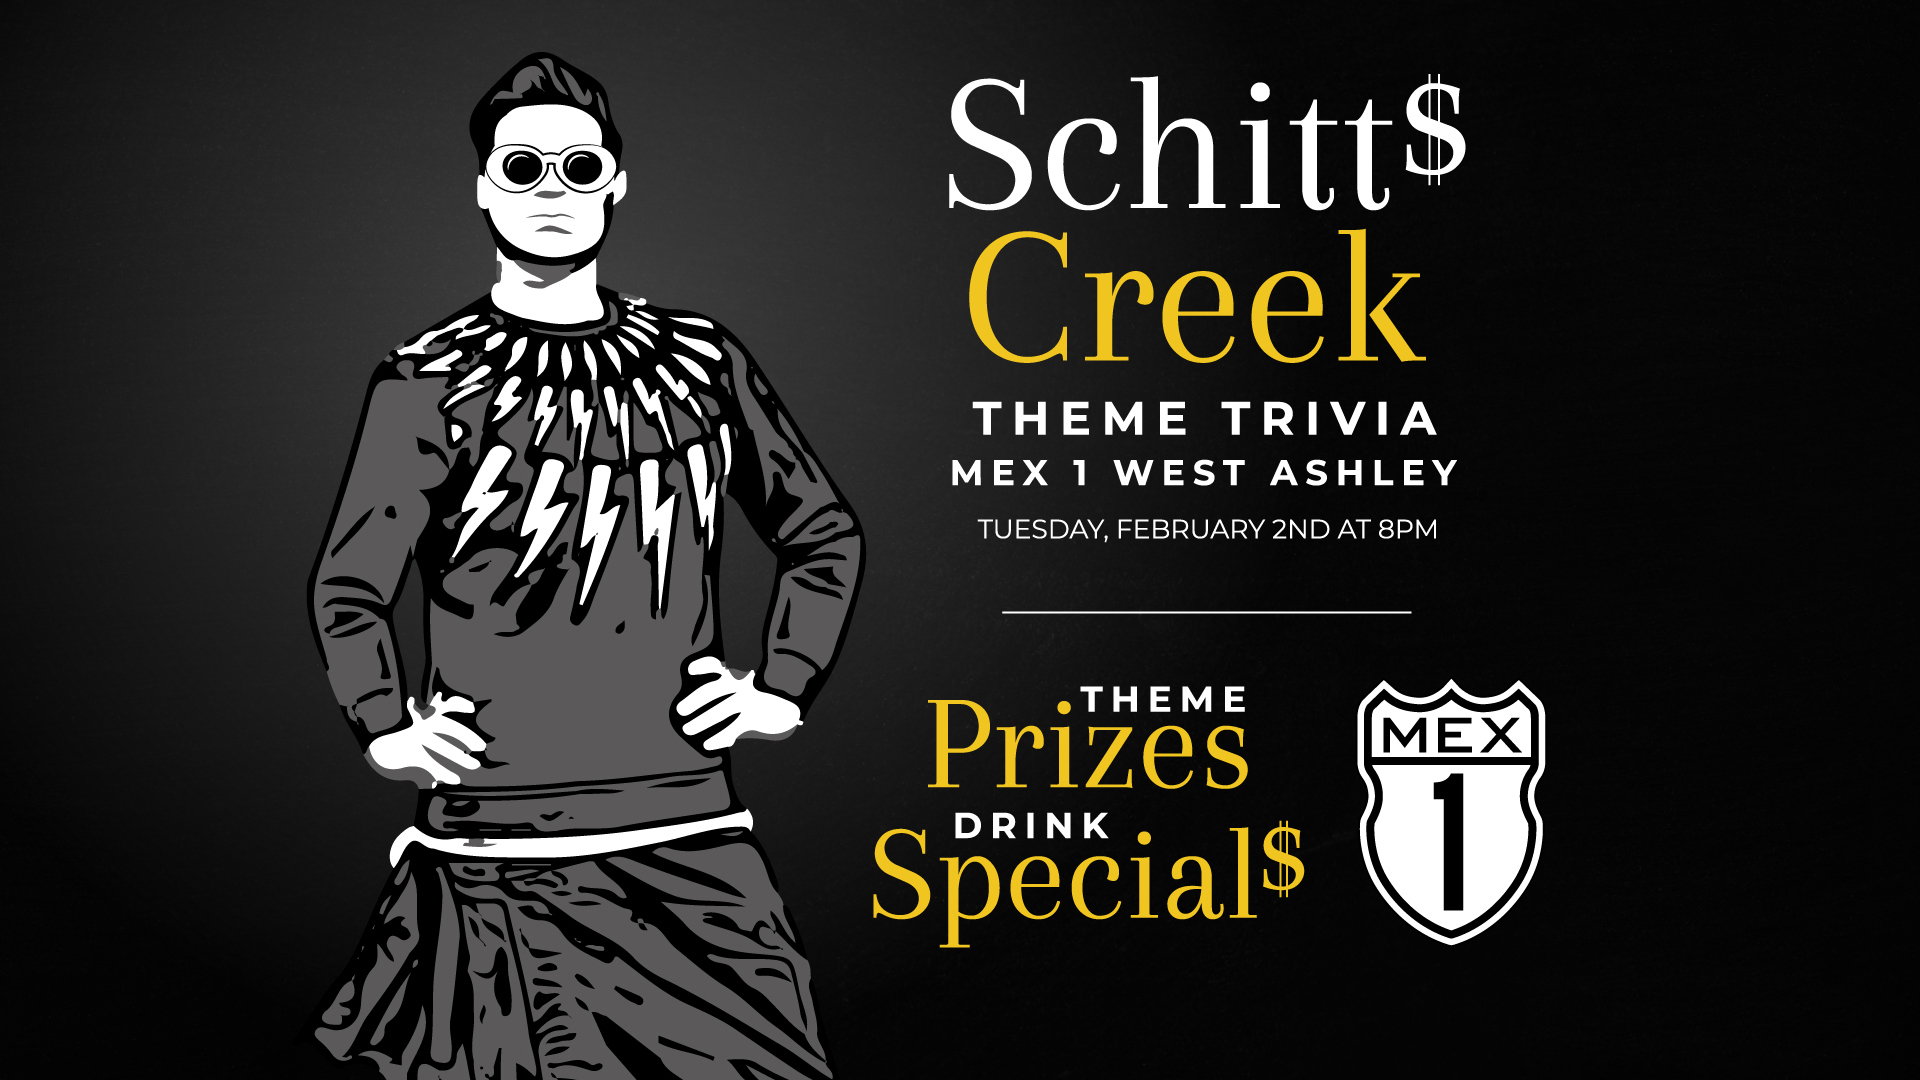 Schitts creek theme trivia at Mex 1 West Ashley on Tuesday, February 2nd at 8pm